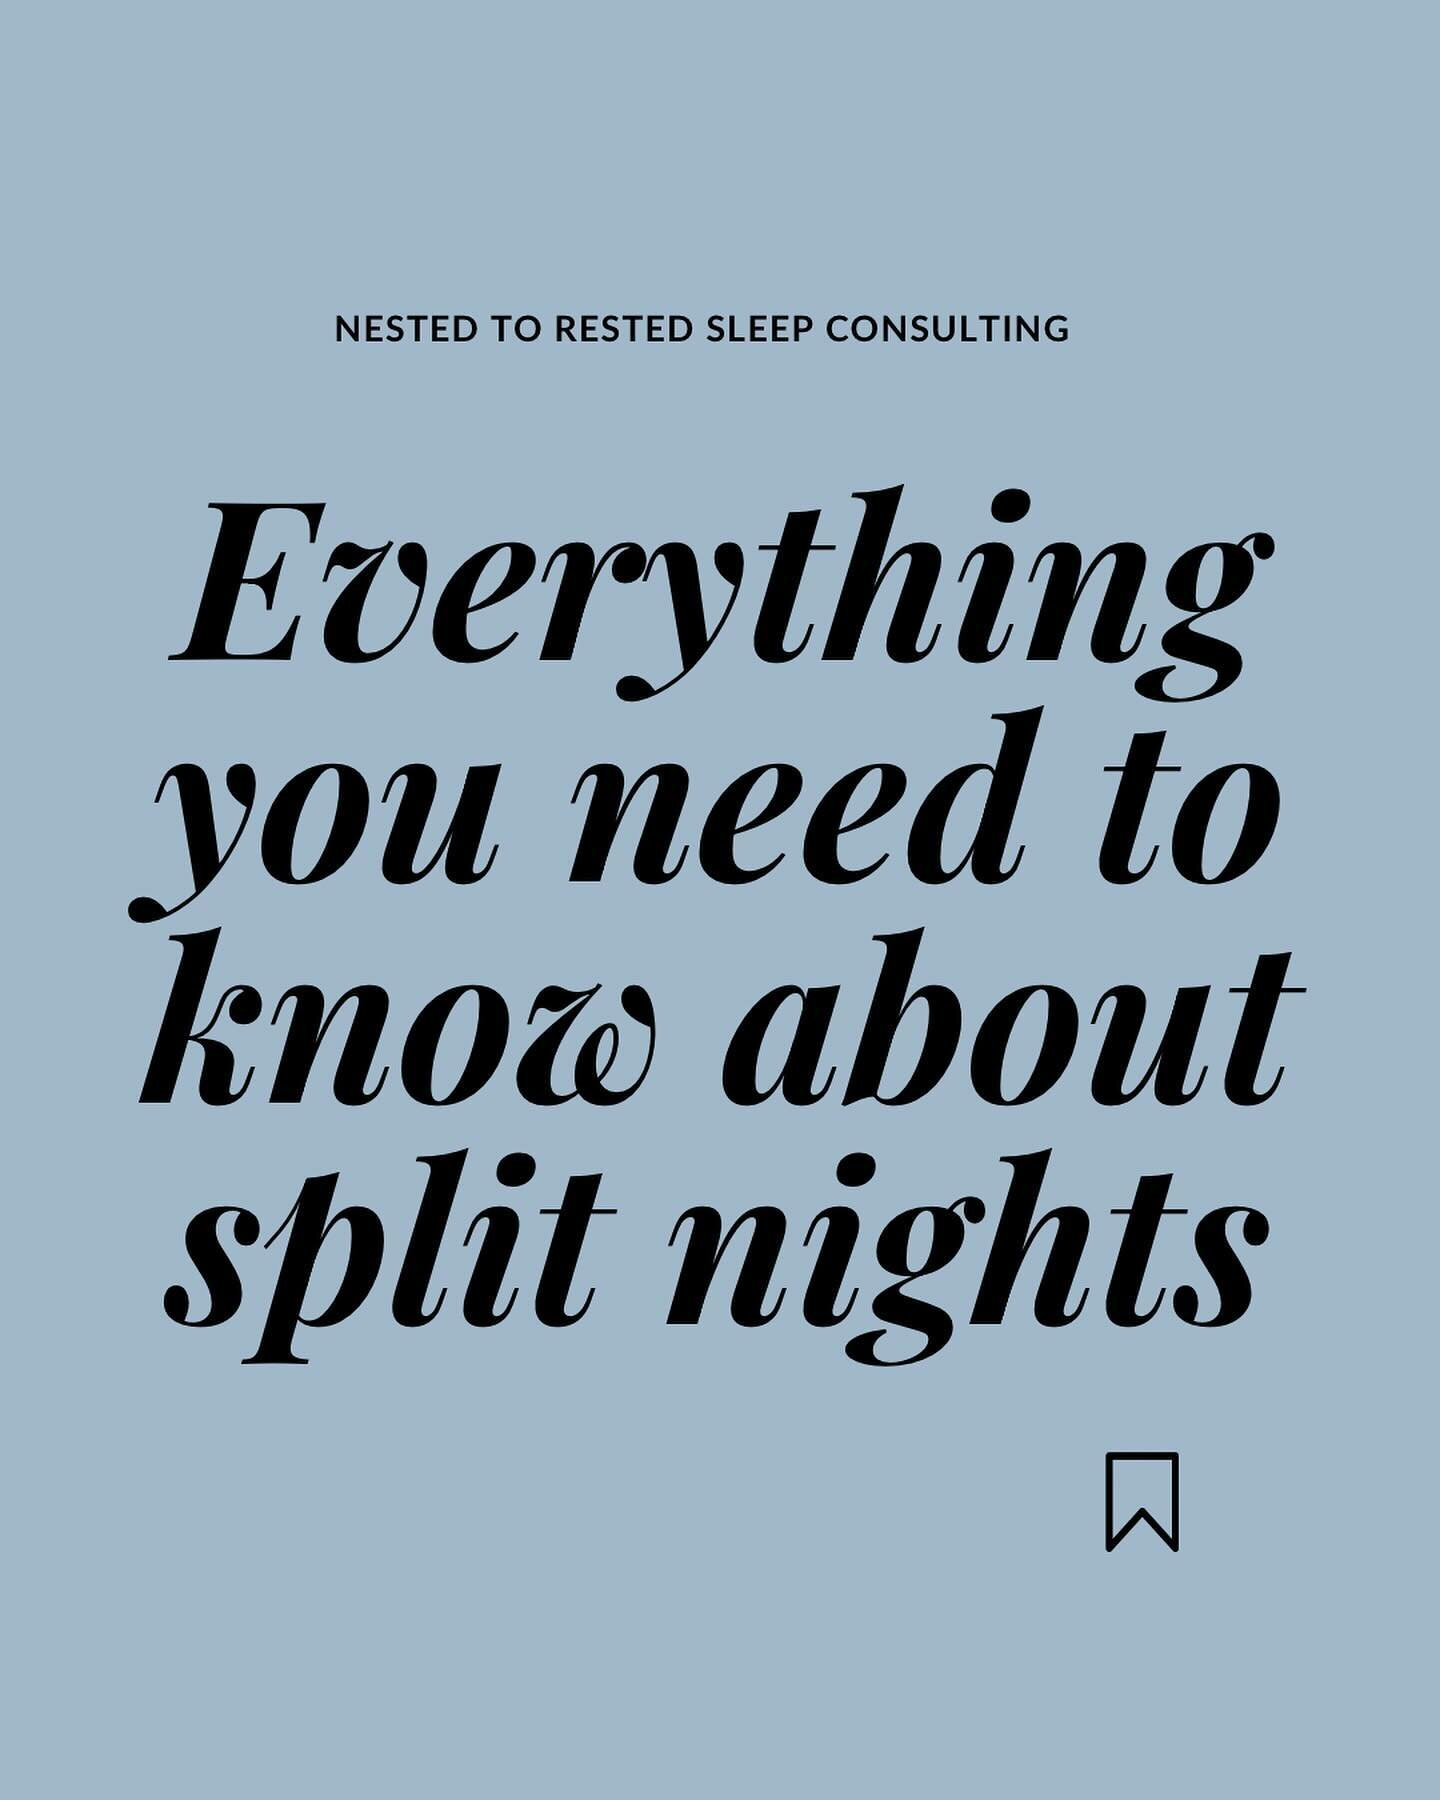 I had a split night this week&hellip;🤦🏽&zwj;♀️

❤️ SAVE this post for future reference and share it with any parents who might find it helpful!

Follow @nestedtorestedsleep for baby sleep tips that will help you have a well-rested family! 💤

I wis